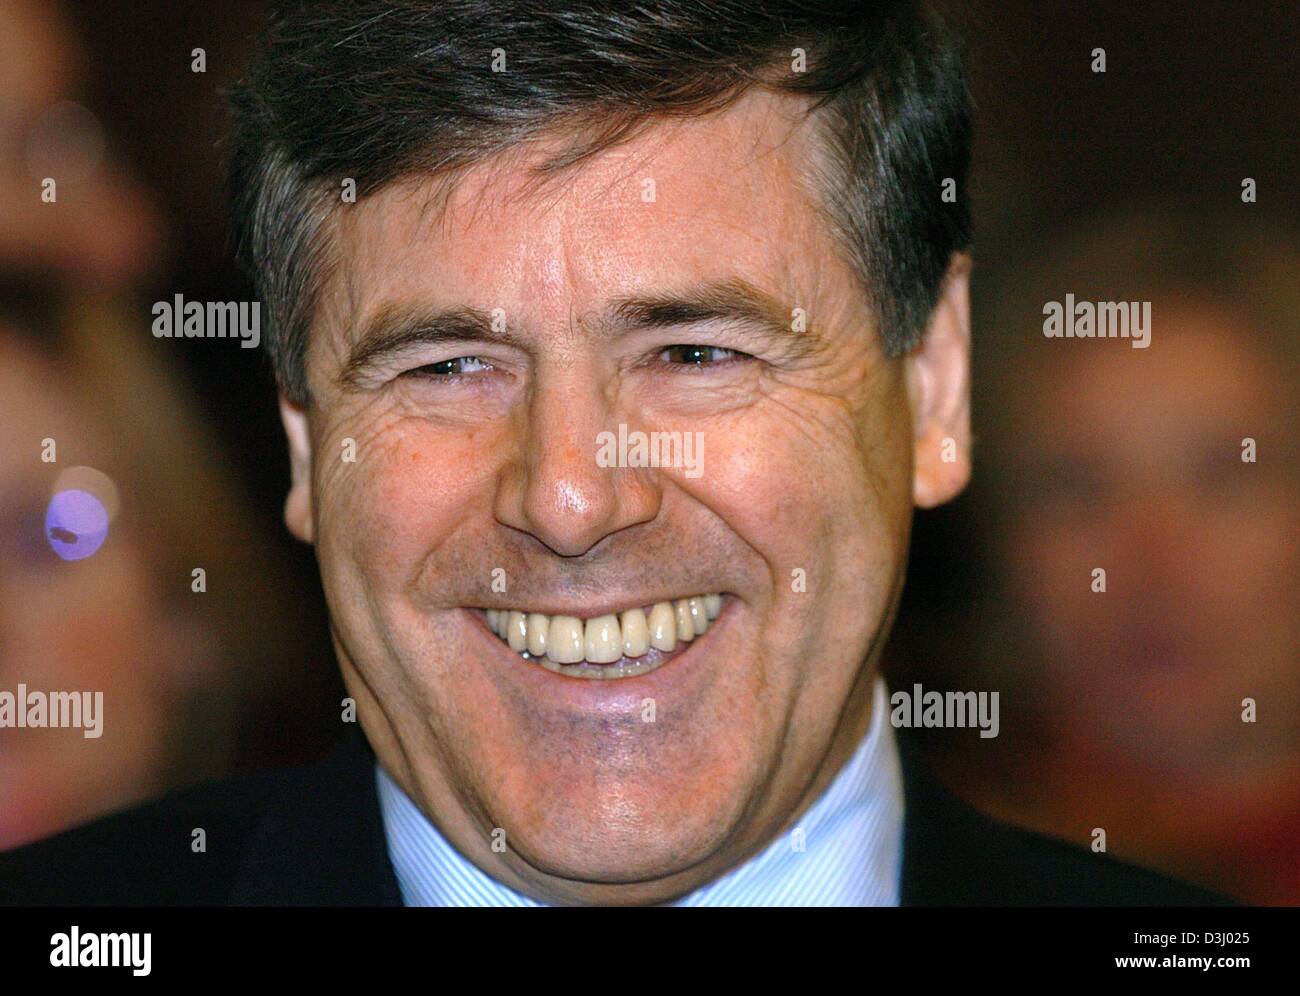 (dpa) - Josef Ackermann (R), chairman of the Deutschen Bank AG, smiles shortly before the start of the so-called Mannesmann trial at the District Court in Duesseldorf, Germany on Wednesday, 21 January 2004. The trial focuses on the controversial severance payments which were payed during the purchase of Mannesmann by the British telecommunications group Vodafone. The public prosecu Stock Photo